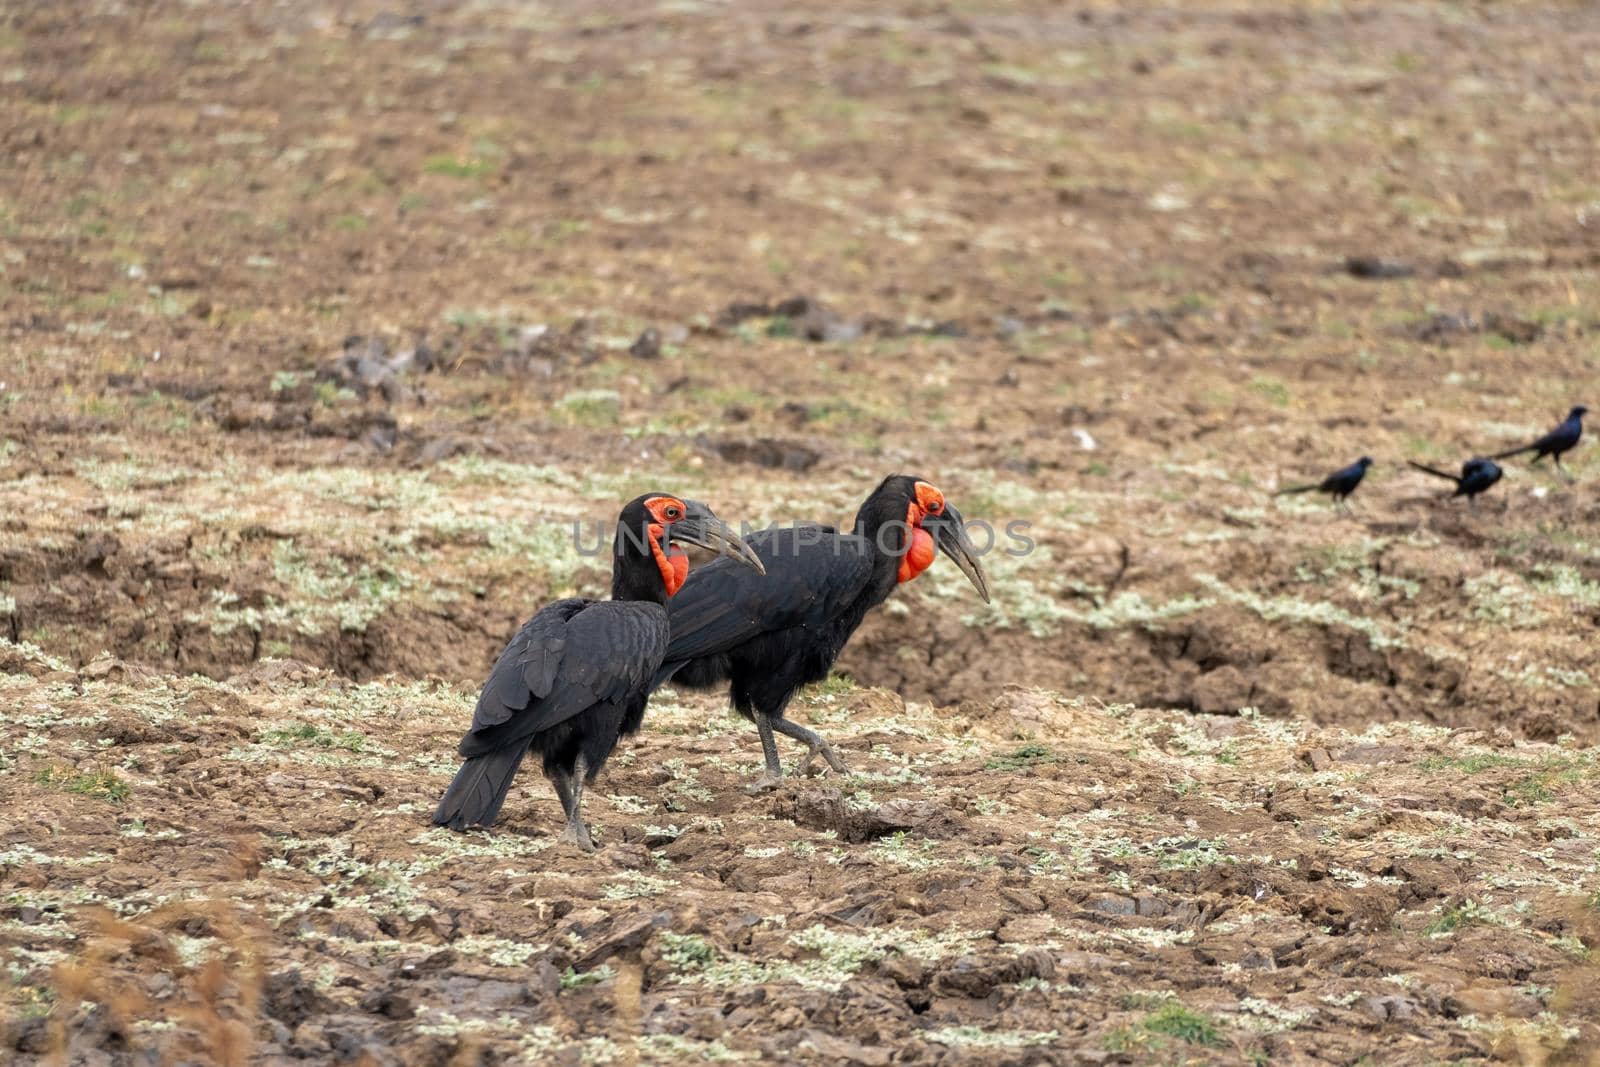 A close-up of two wonderful southern ground hornbill